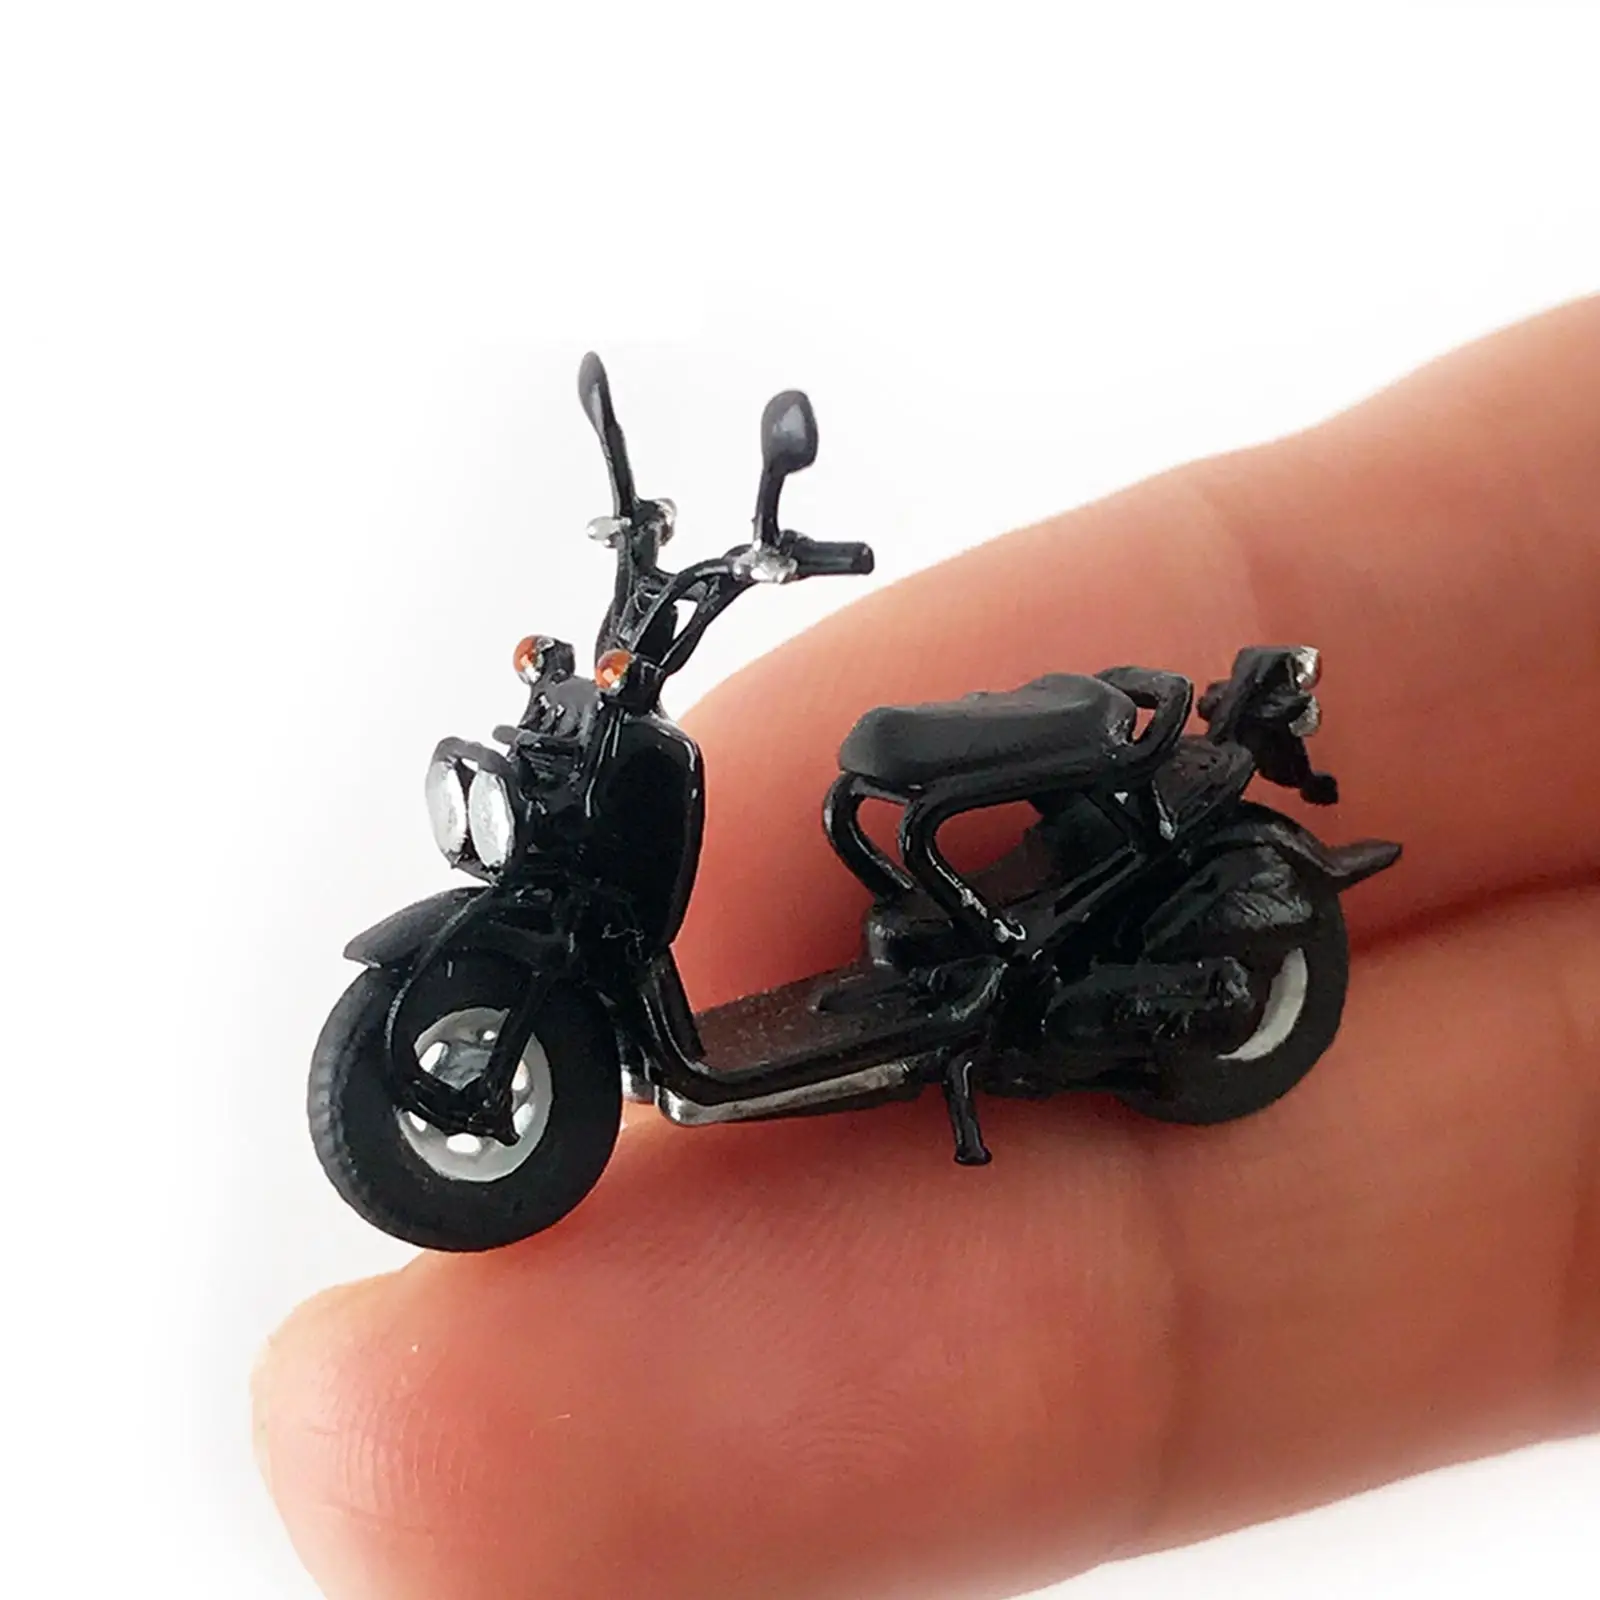 Miniature Motorcycle Model 1/64 Accessories Model Toys for Train Railway Landscape